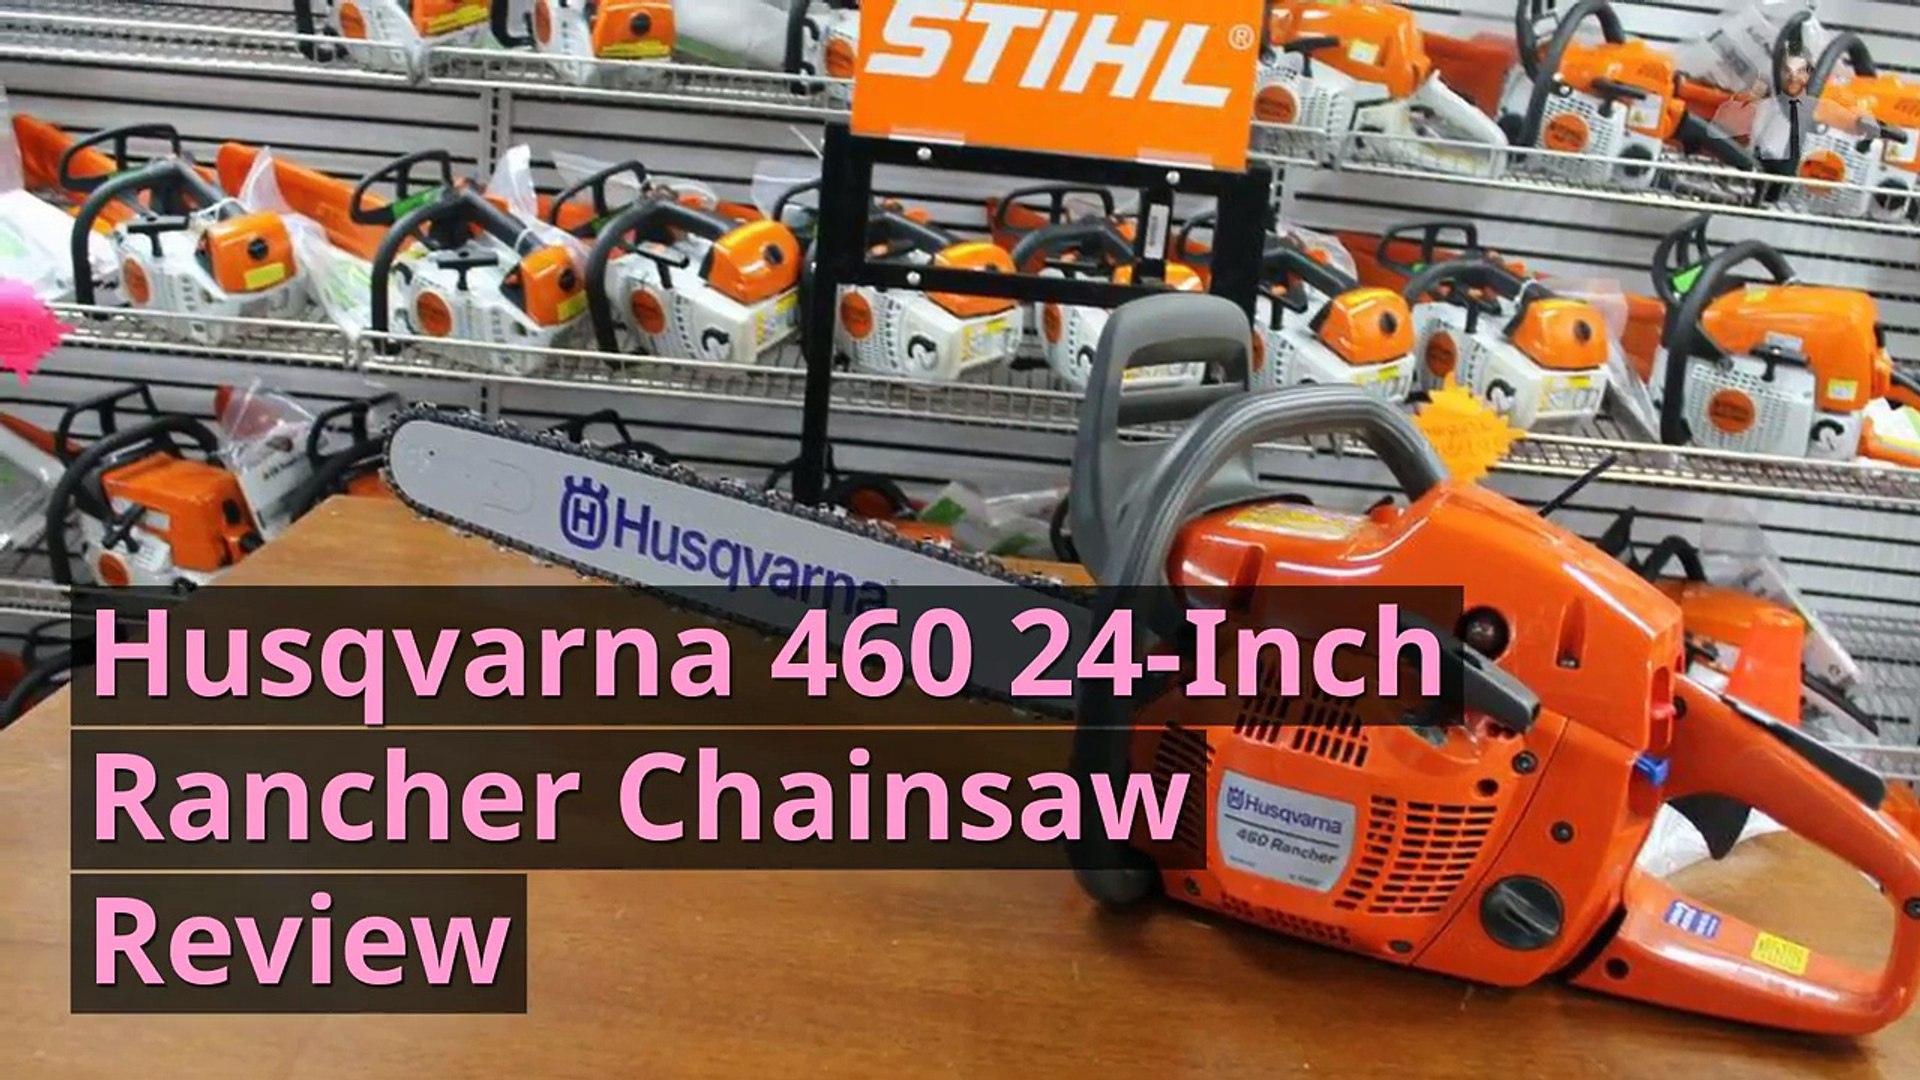 Husqvarna 460 24-Inch Rancher Chainsaw Review - video Dailymotion